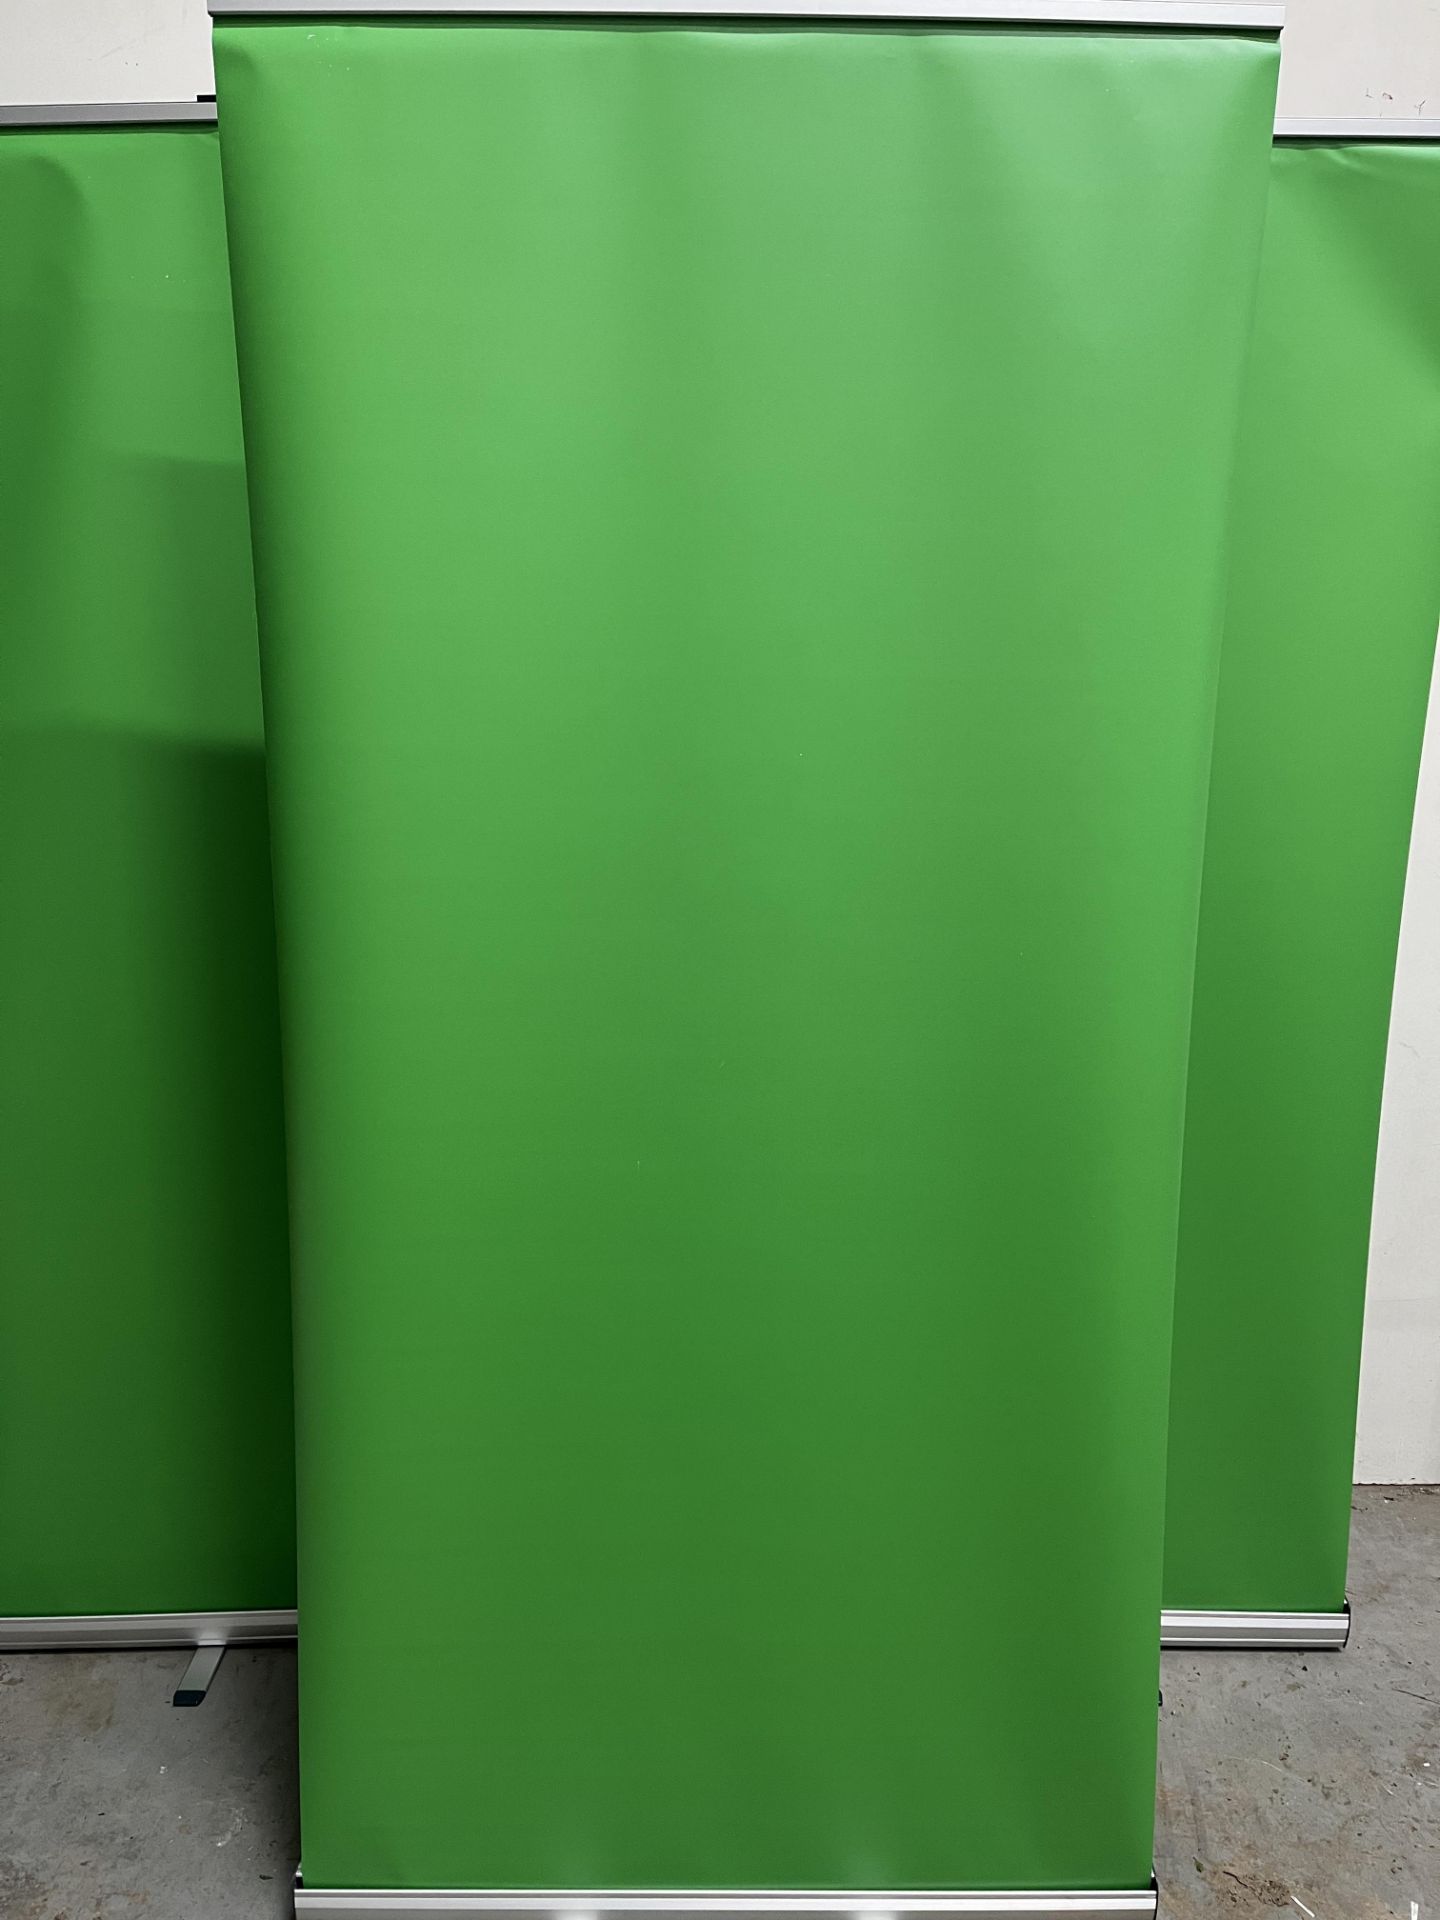 3 x Collapsable Green Screens - As pictured - Image 5 of 10